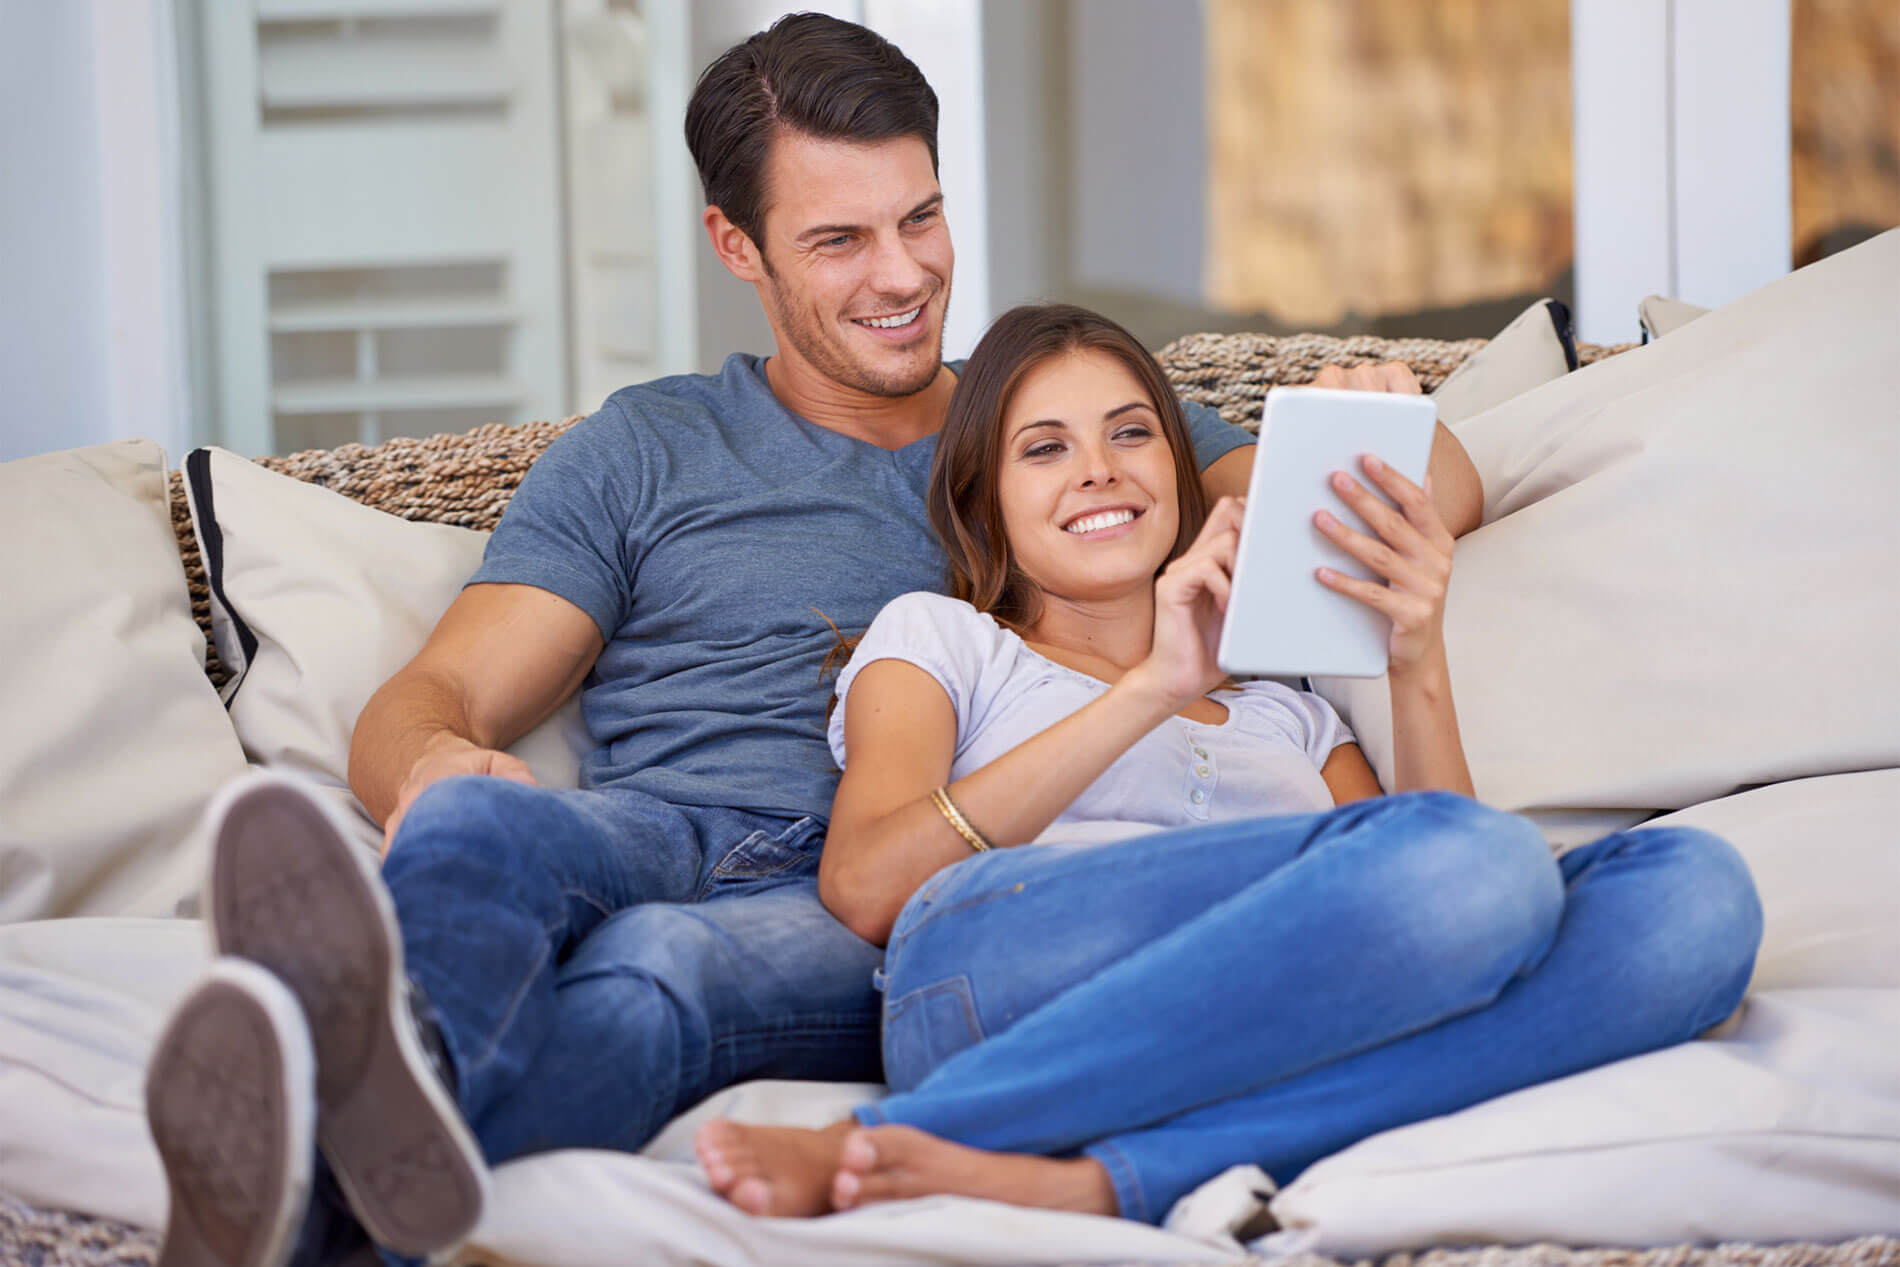 Man and woman lounging on couch